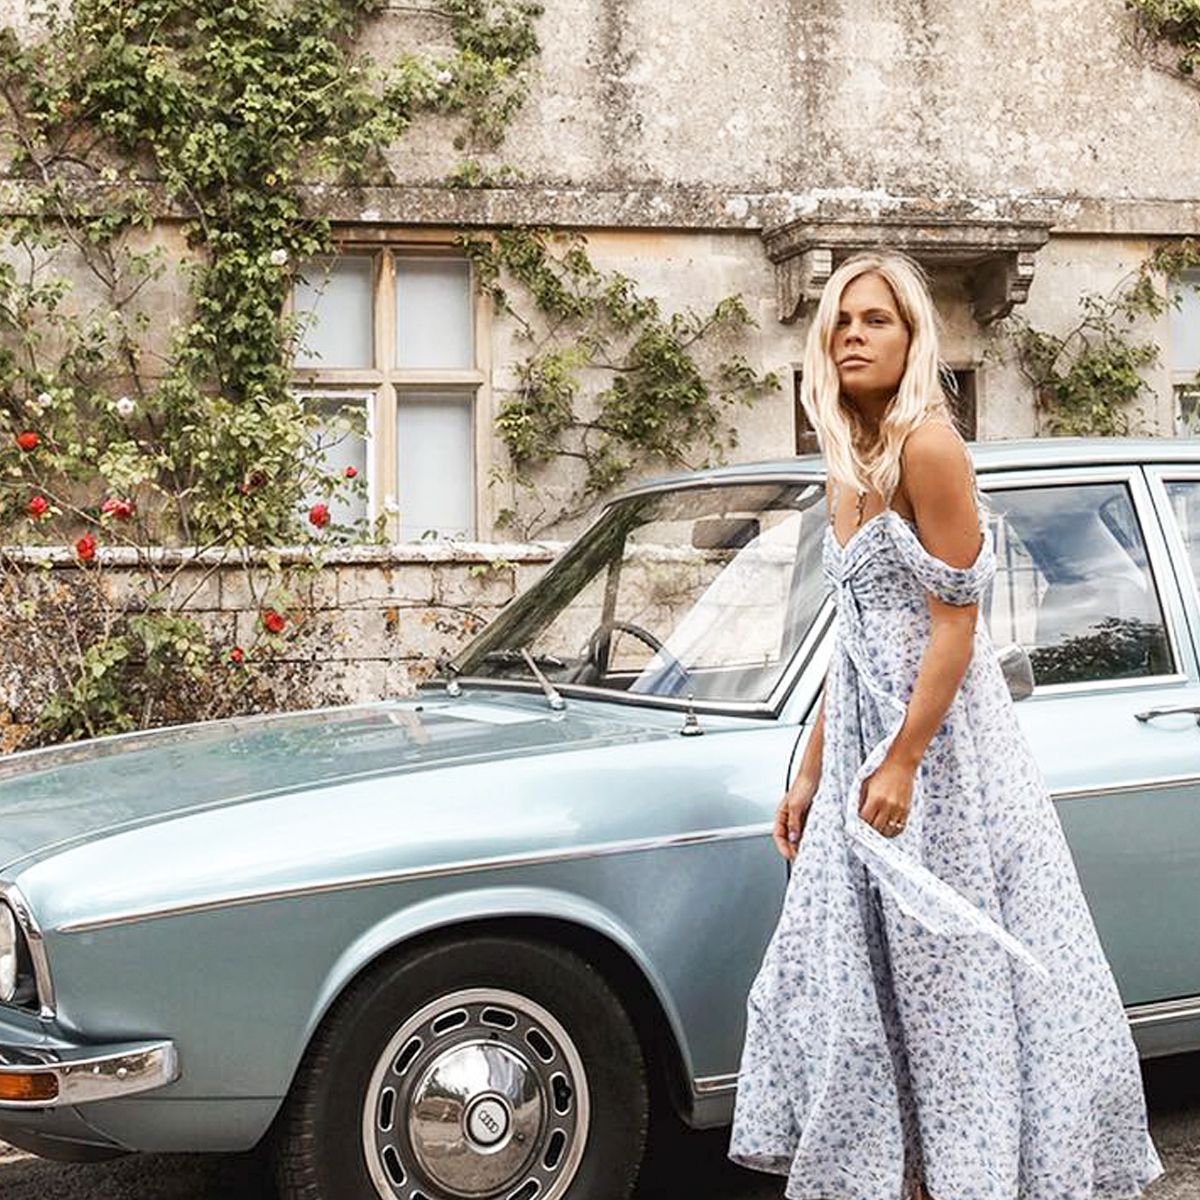 9 Easy Wedding Guest Outfit Ideas That Work Every Single Time